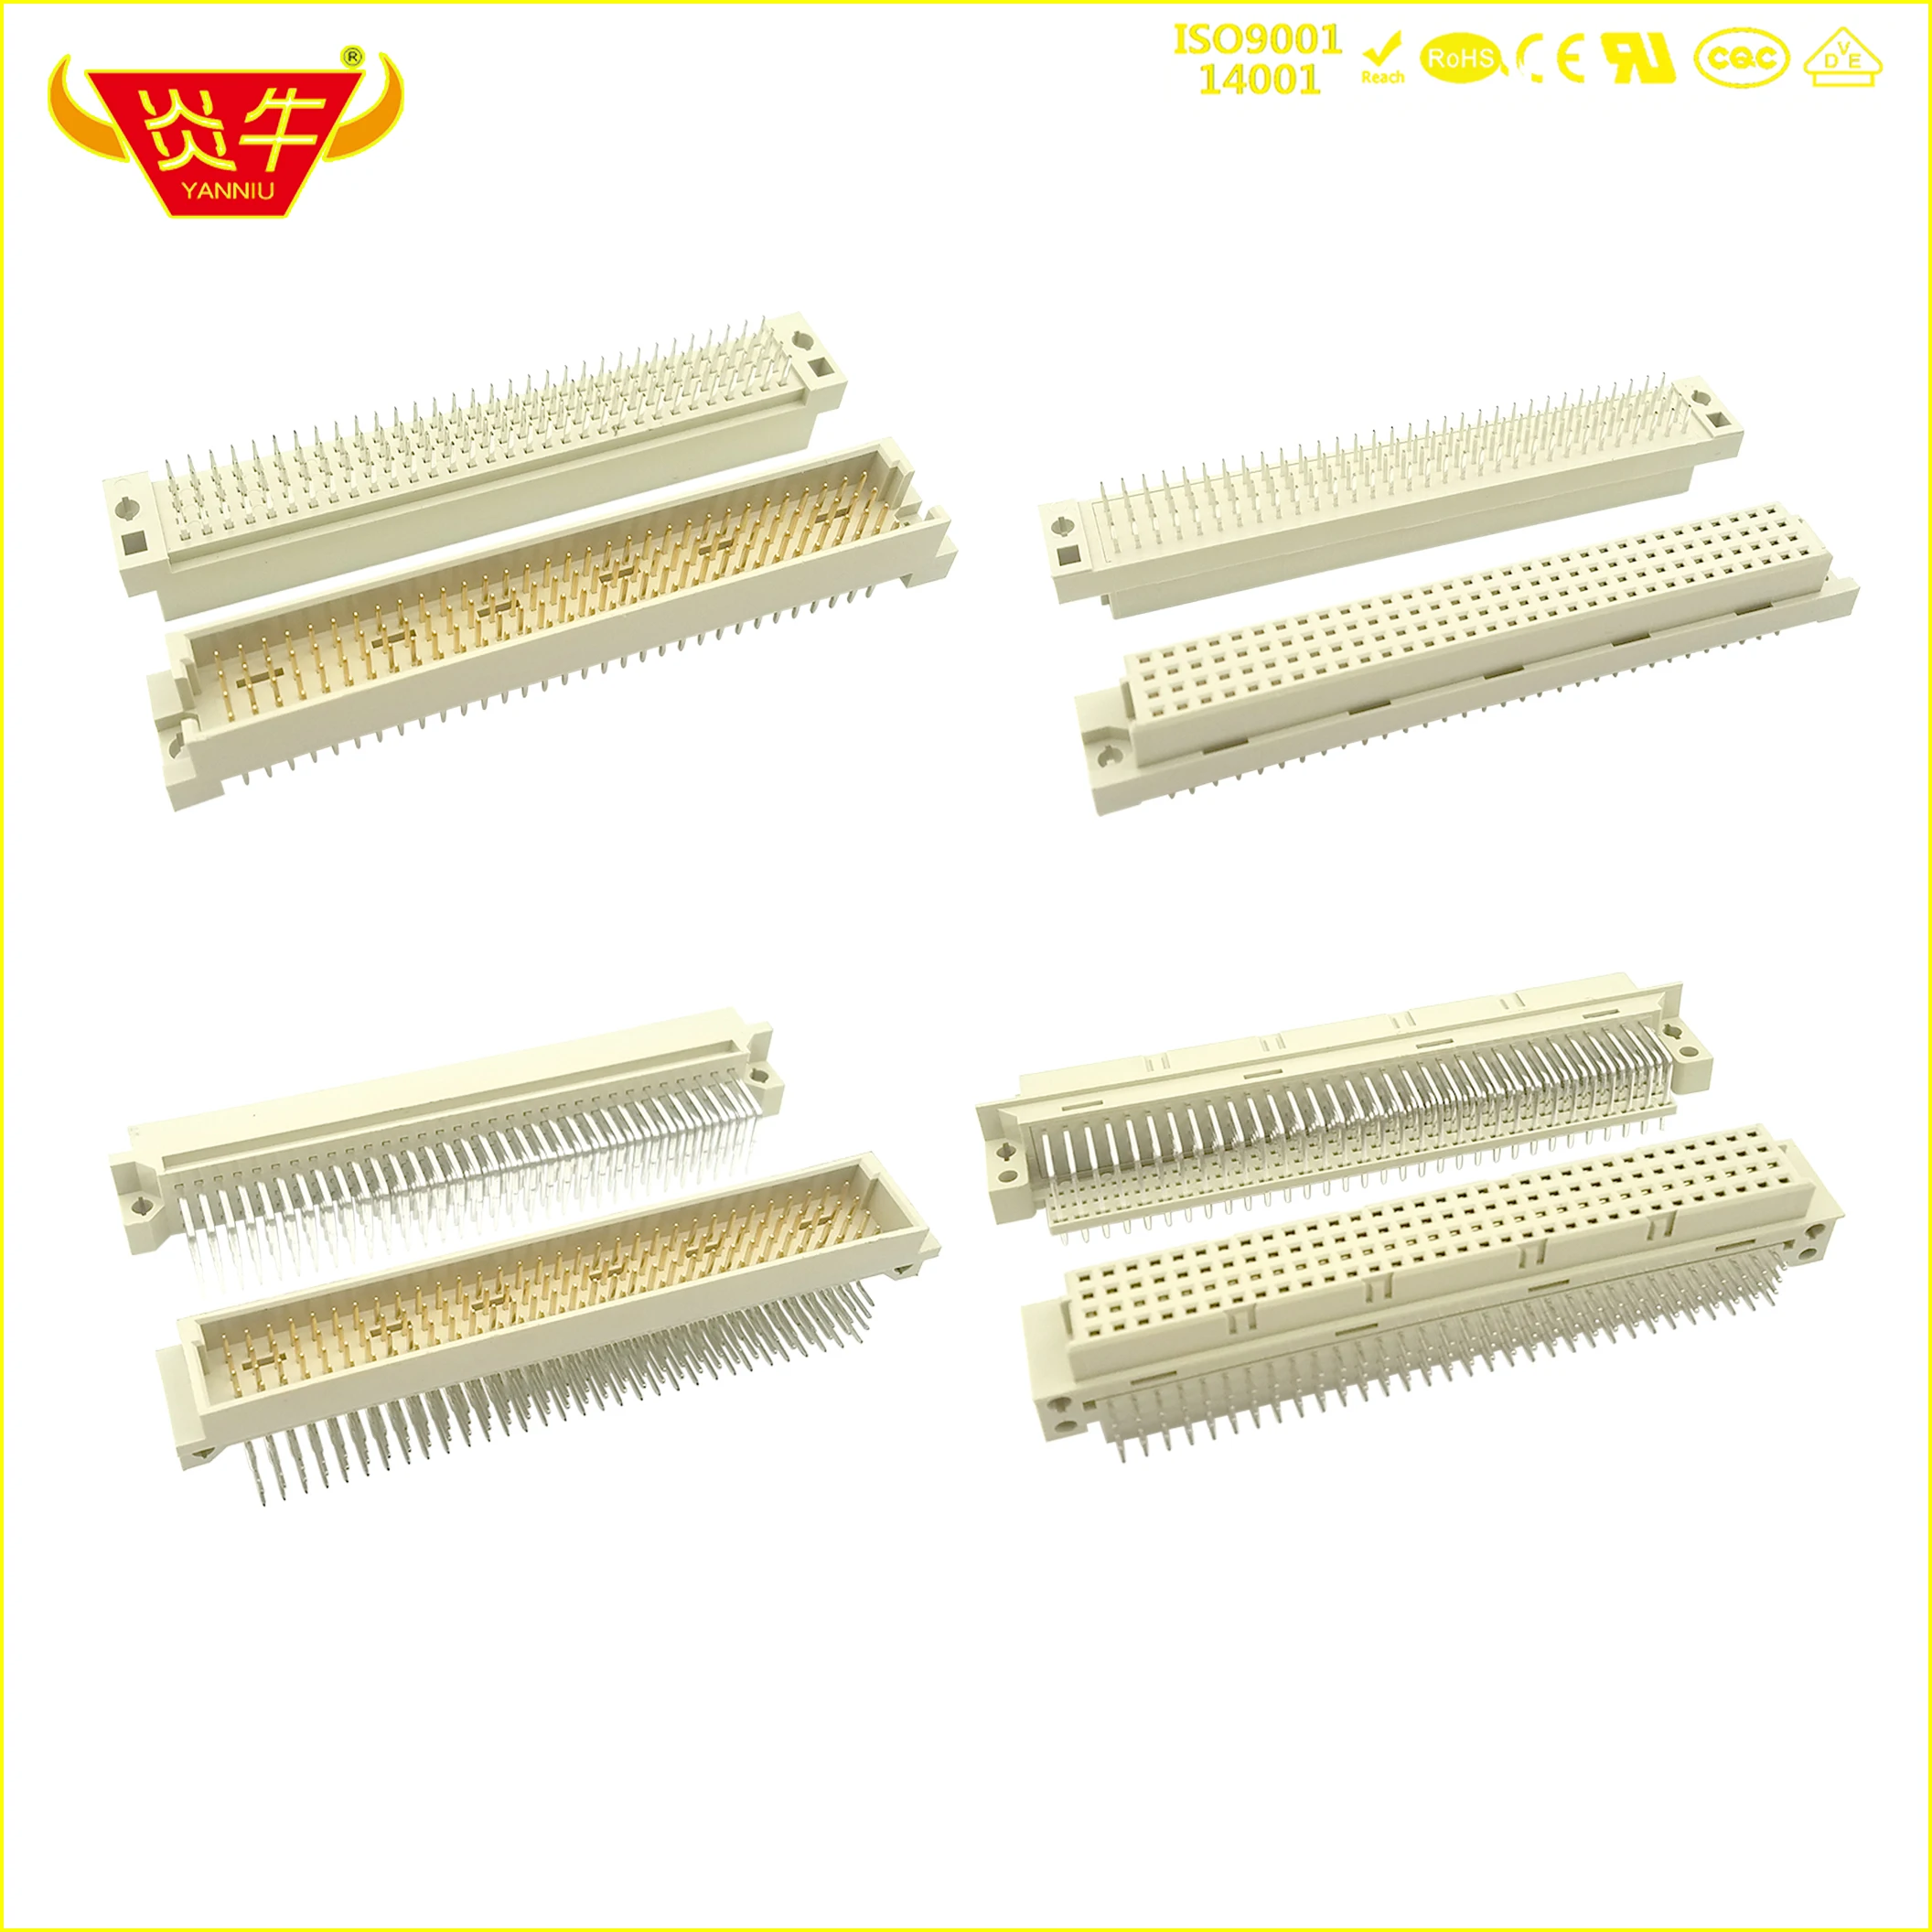 10Set 4128 DIN 2.54mm Pitch 4Row CONNECTOR 4*32P 128PIN Female And Male RIGHT ANGLE PINS EUROPEAN SOCKET 3100  1100 4128